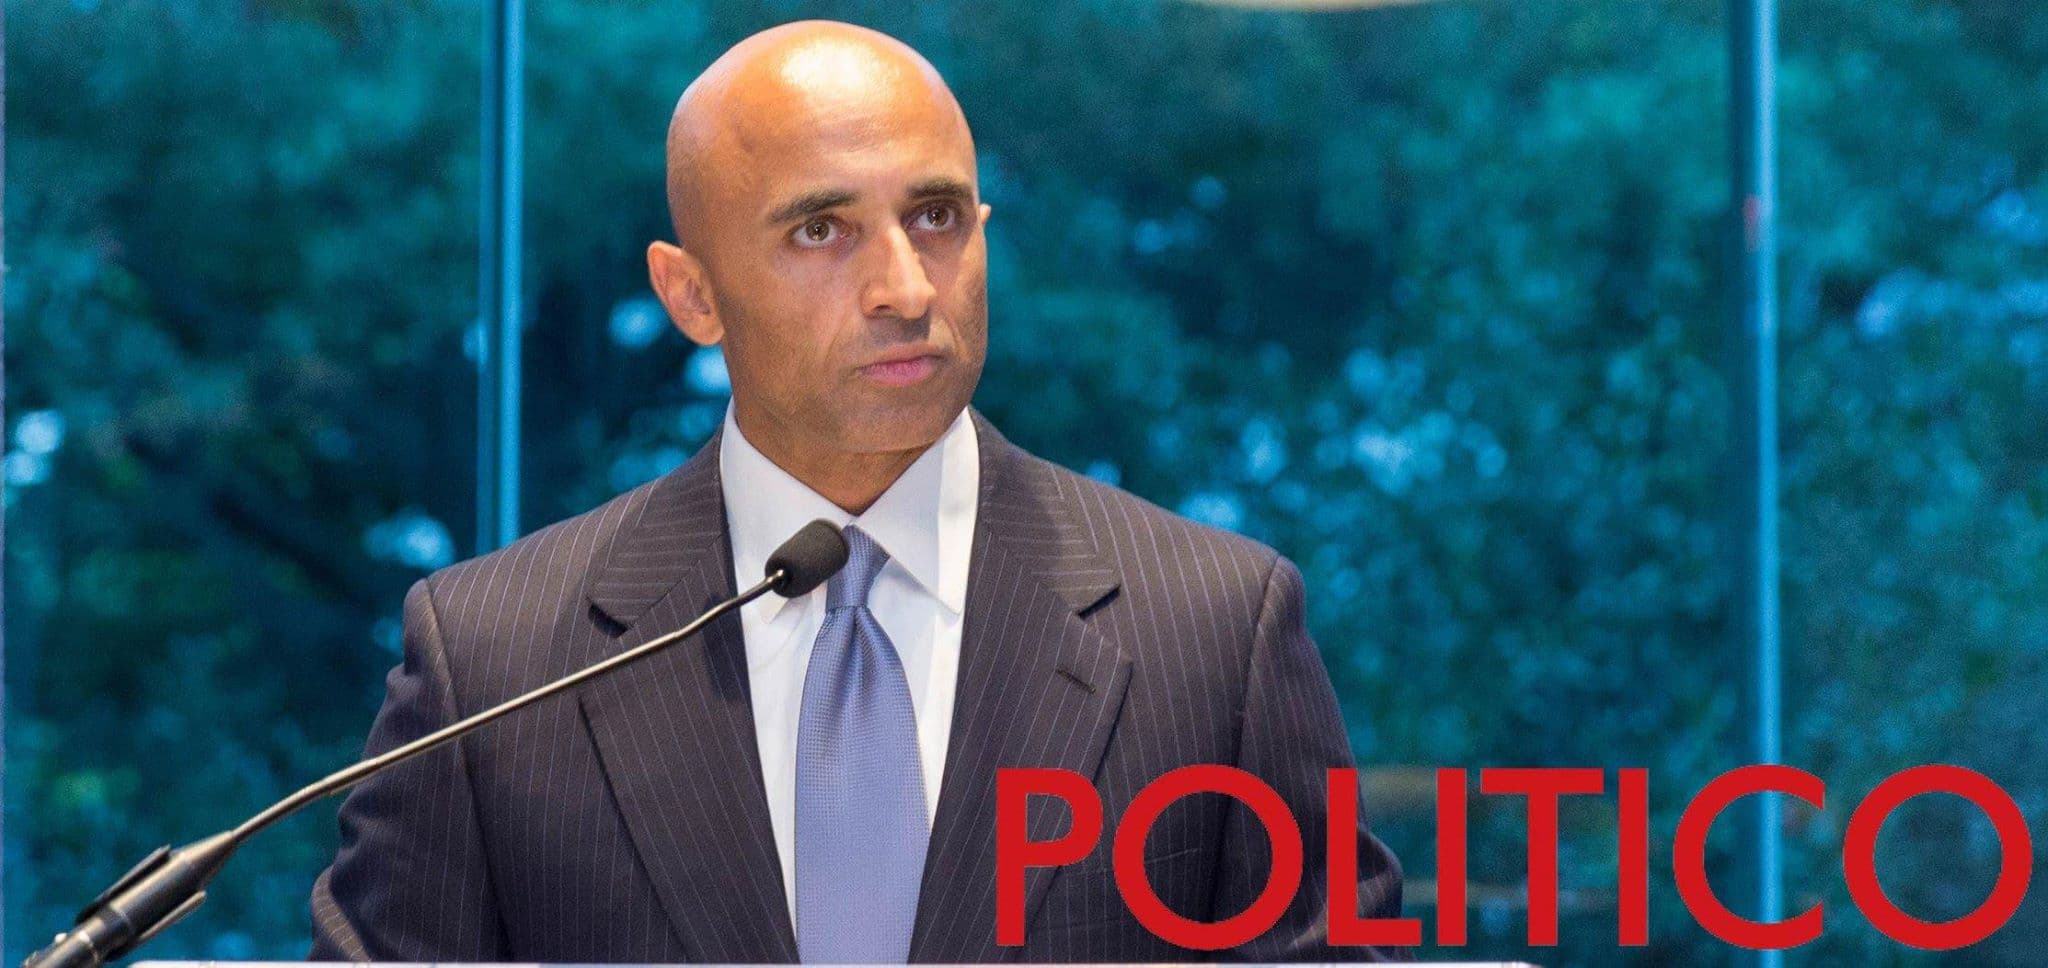 "ISIL Can't be Beat on the Battlefield Alone" Early in February, in a POLITICO op-ed, United Arab Emirates Ambassador to the US, Yousef Al Otaiba said the key to long-term success in eradicating violent extremism happens off the battlefield by cutting the flow of funds to terrorist organizations, enforcing stricter sanctions and discrediting extremists' radical ideology by speaking out for moderation and tolerance. Read Ambassador Al Otaiba's Op-Ed Here: http://ow.ly/JaZN2